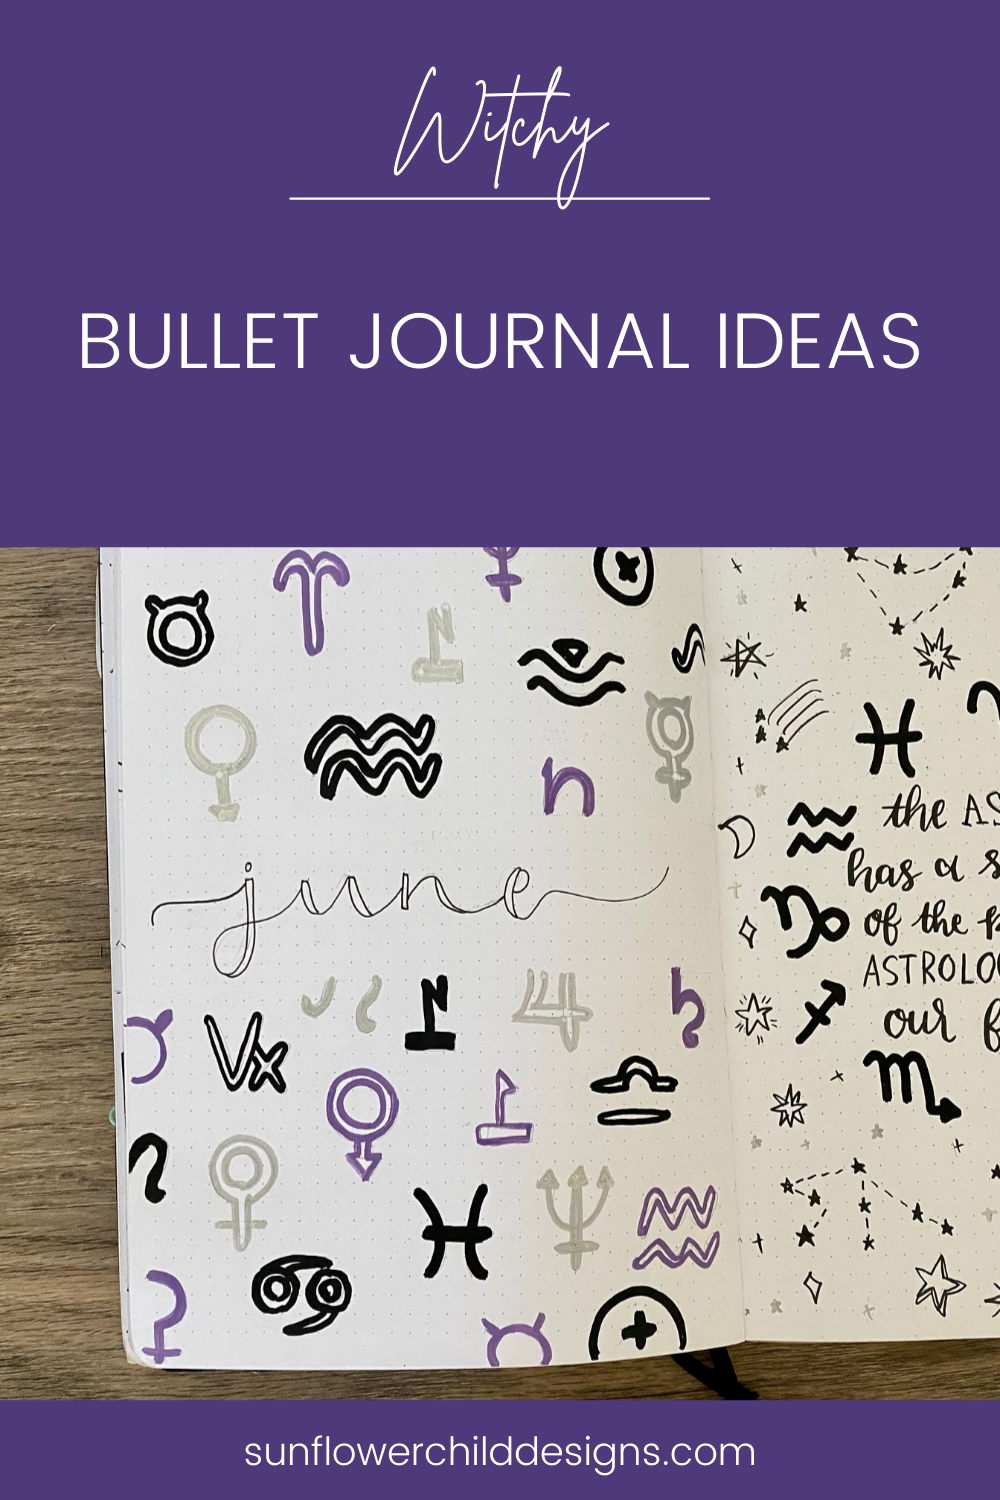 witchy-bullet-journal-ideas-june-bullet-journal-ideas 8.png